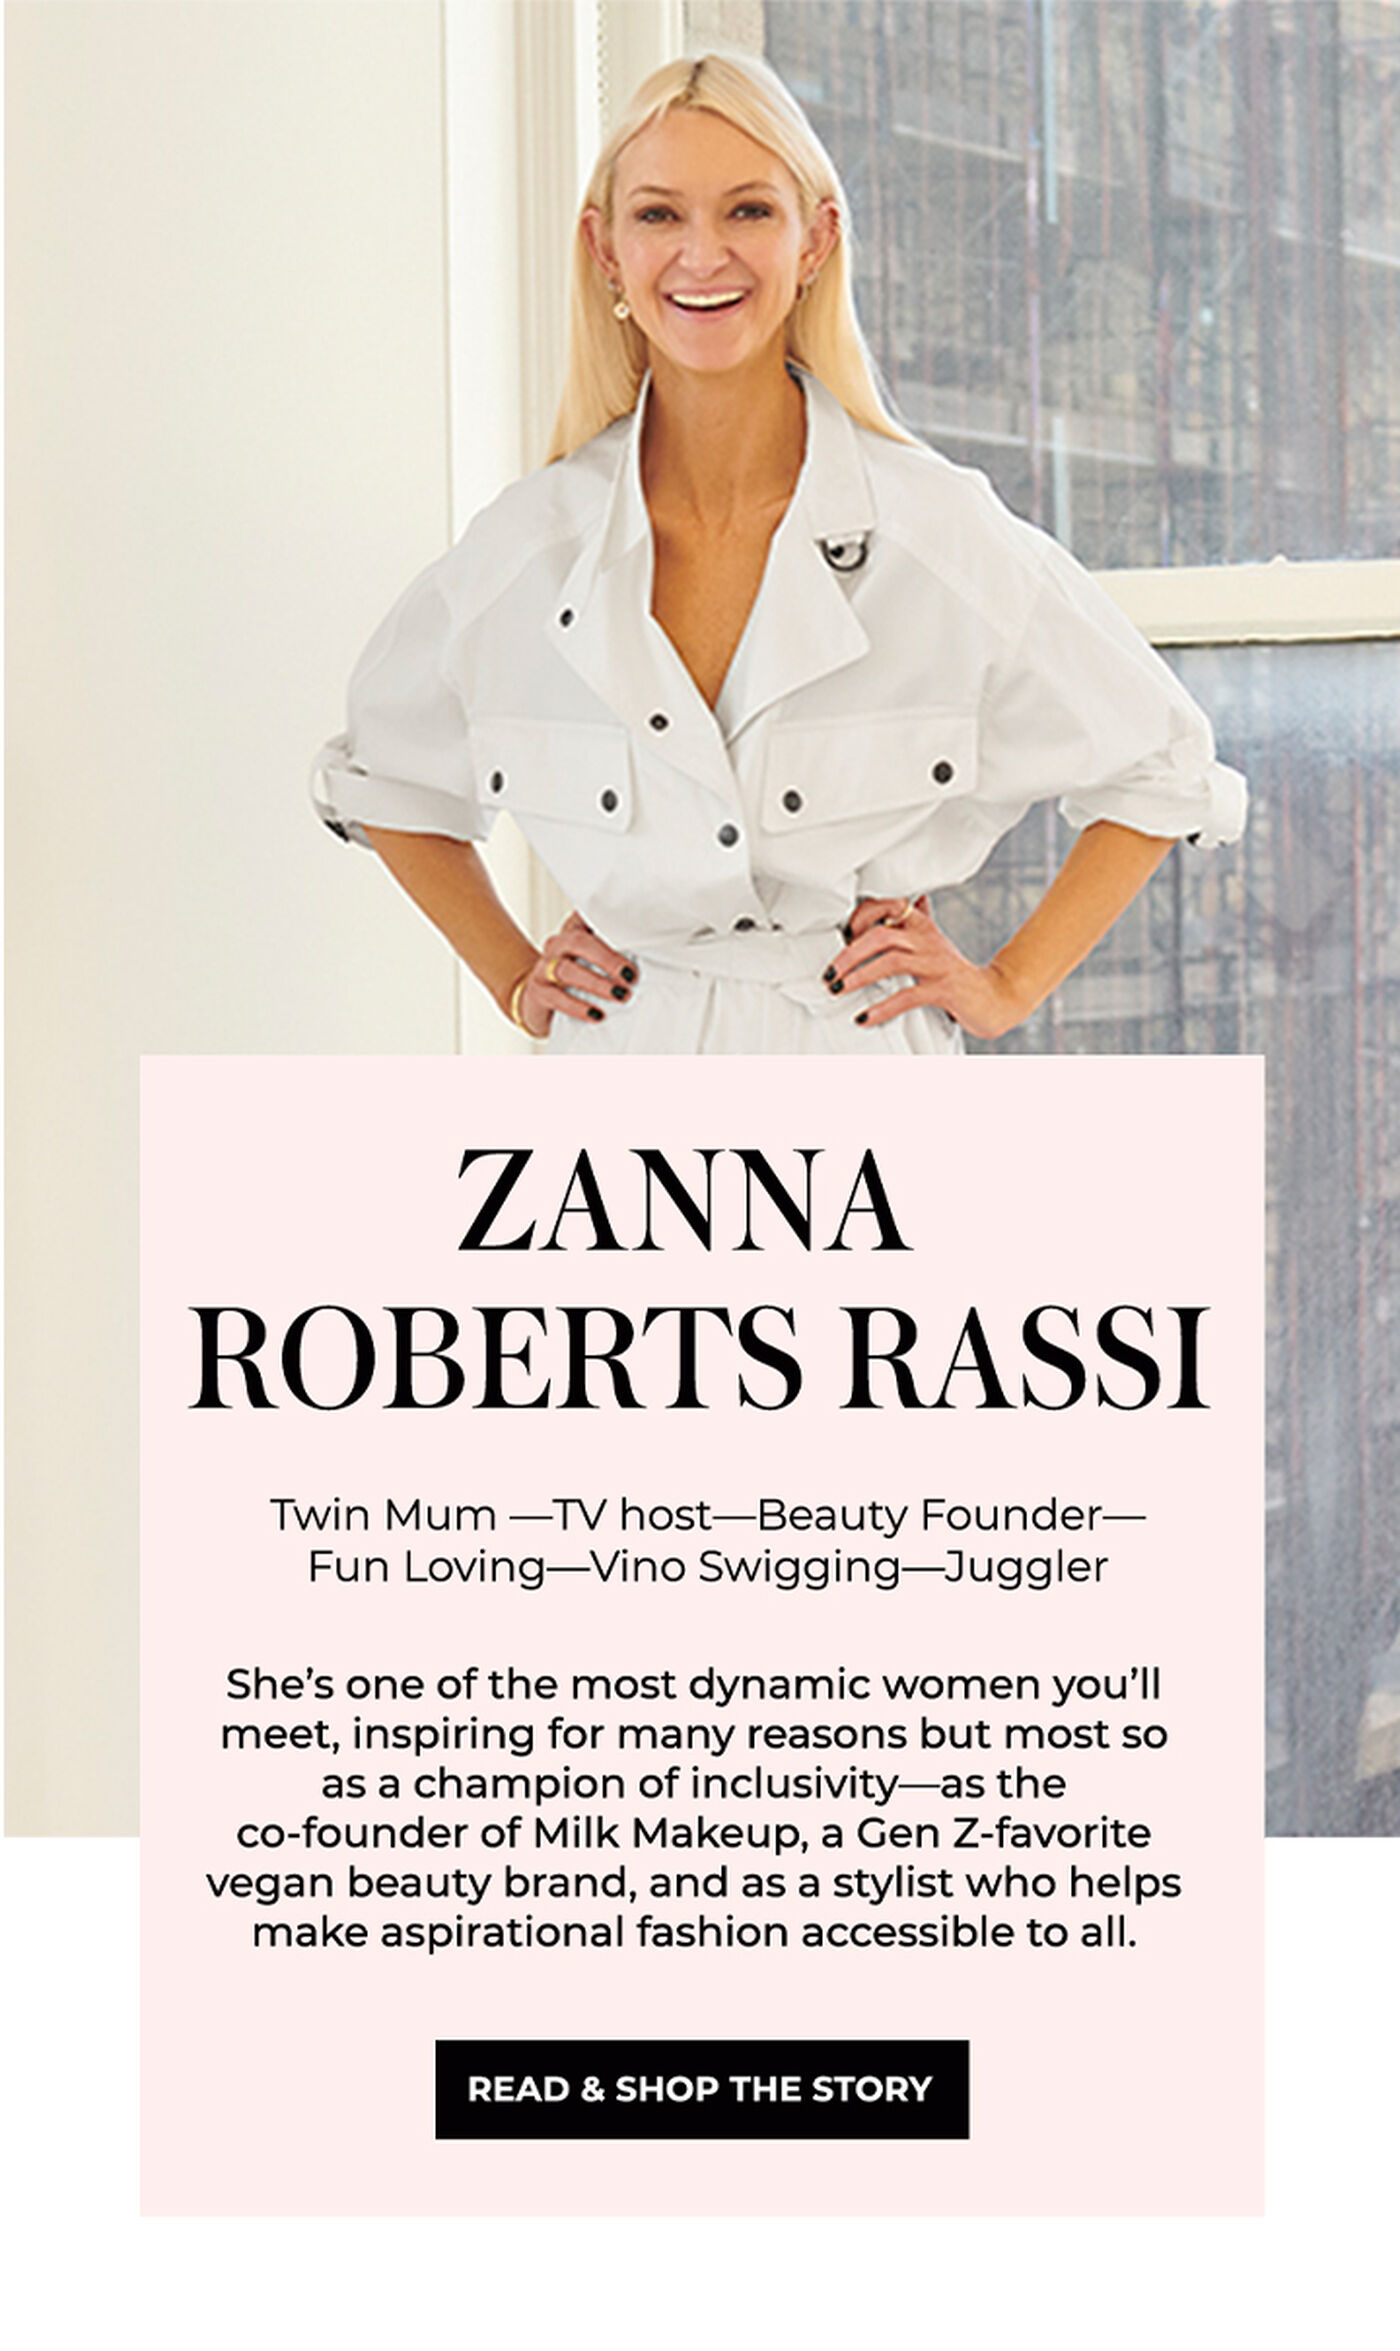 "ZANNA ROBERTS RASSI Twin Mum-TV host-Beauty Founder- Fun Loving-Vino Swigging-Juggler She's one of the most dynamic women you'll meet, inspiring for many reasons but most so as a champion of inclusivity-as the co-founder of Milk Makeup, a Gen Z-favorite vegan beauty brand, and as a stylist who helps make aspirational fashion accessible to all."